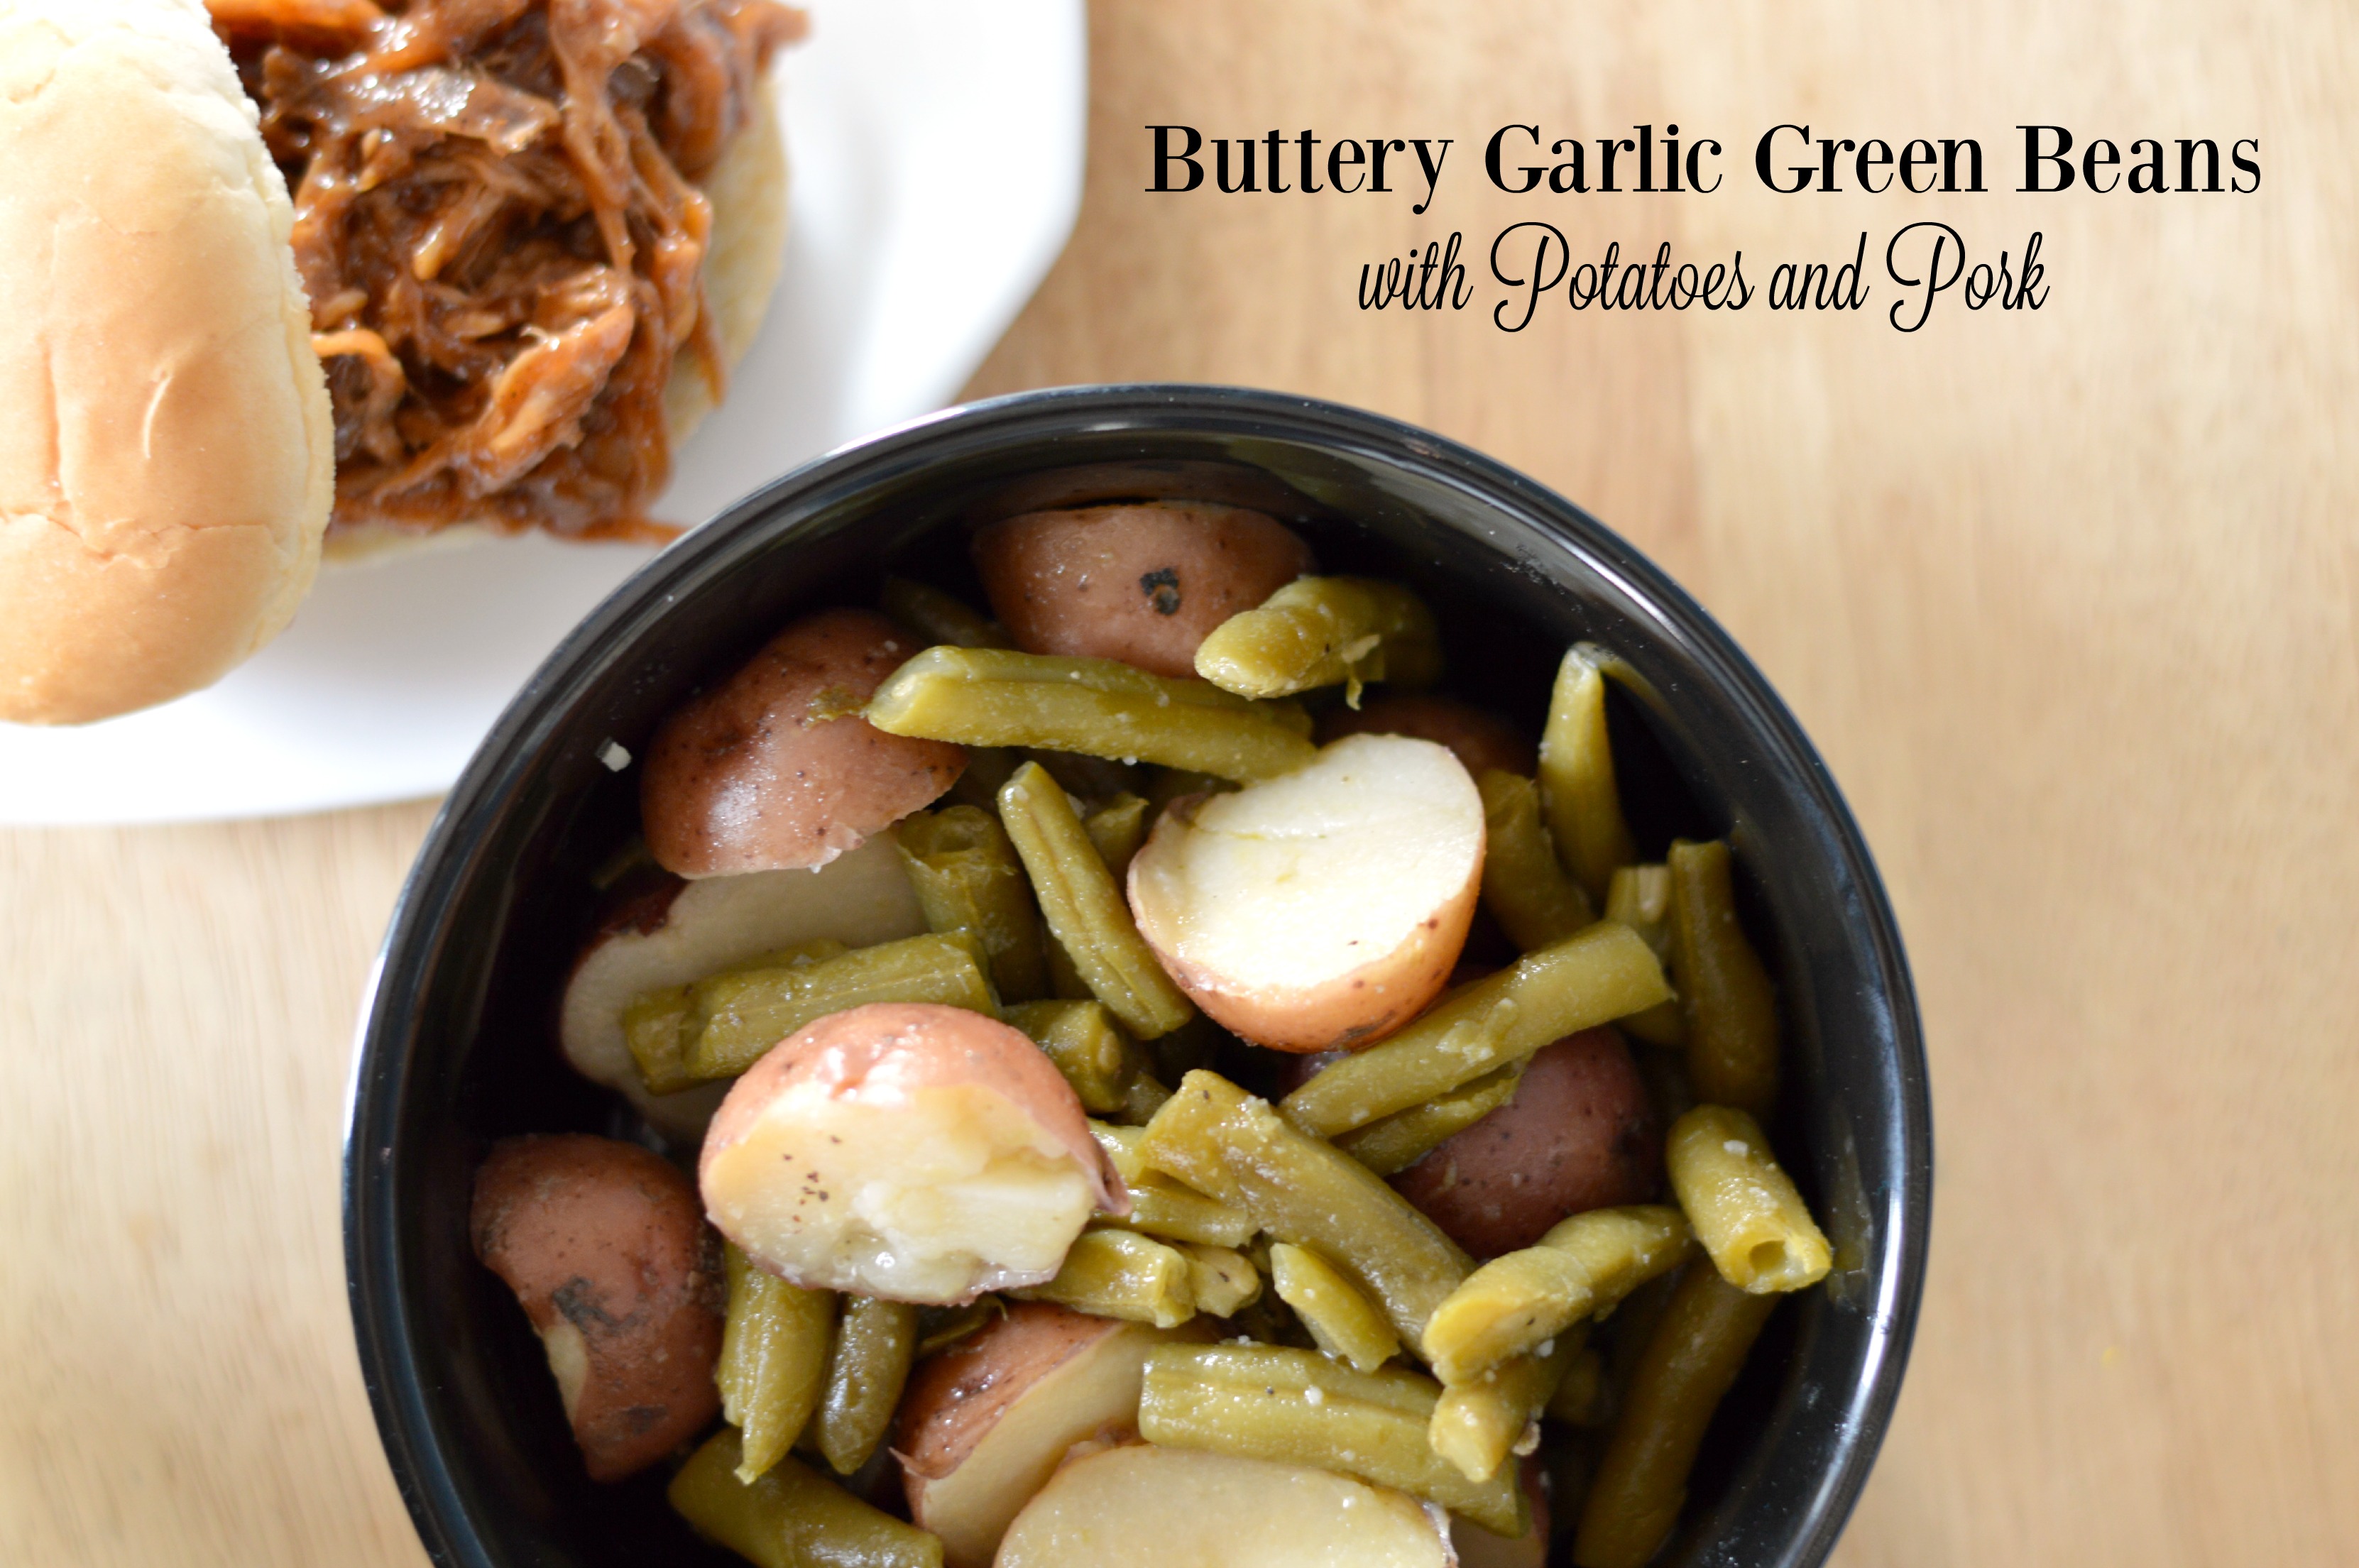 Buttery garlic green beans with potatoes